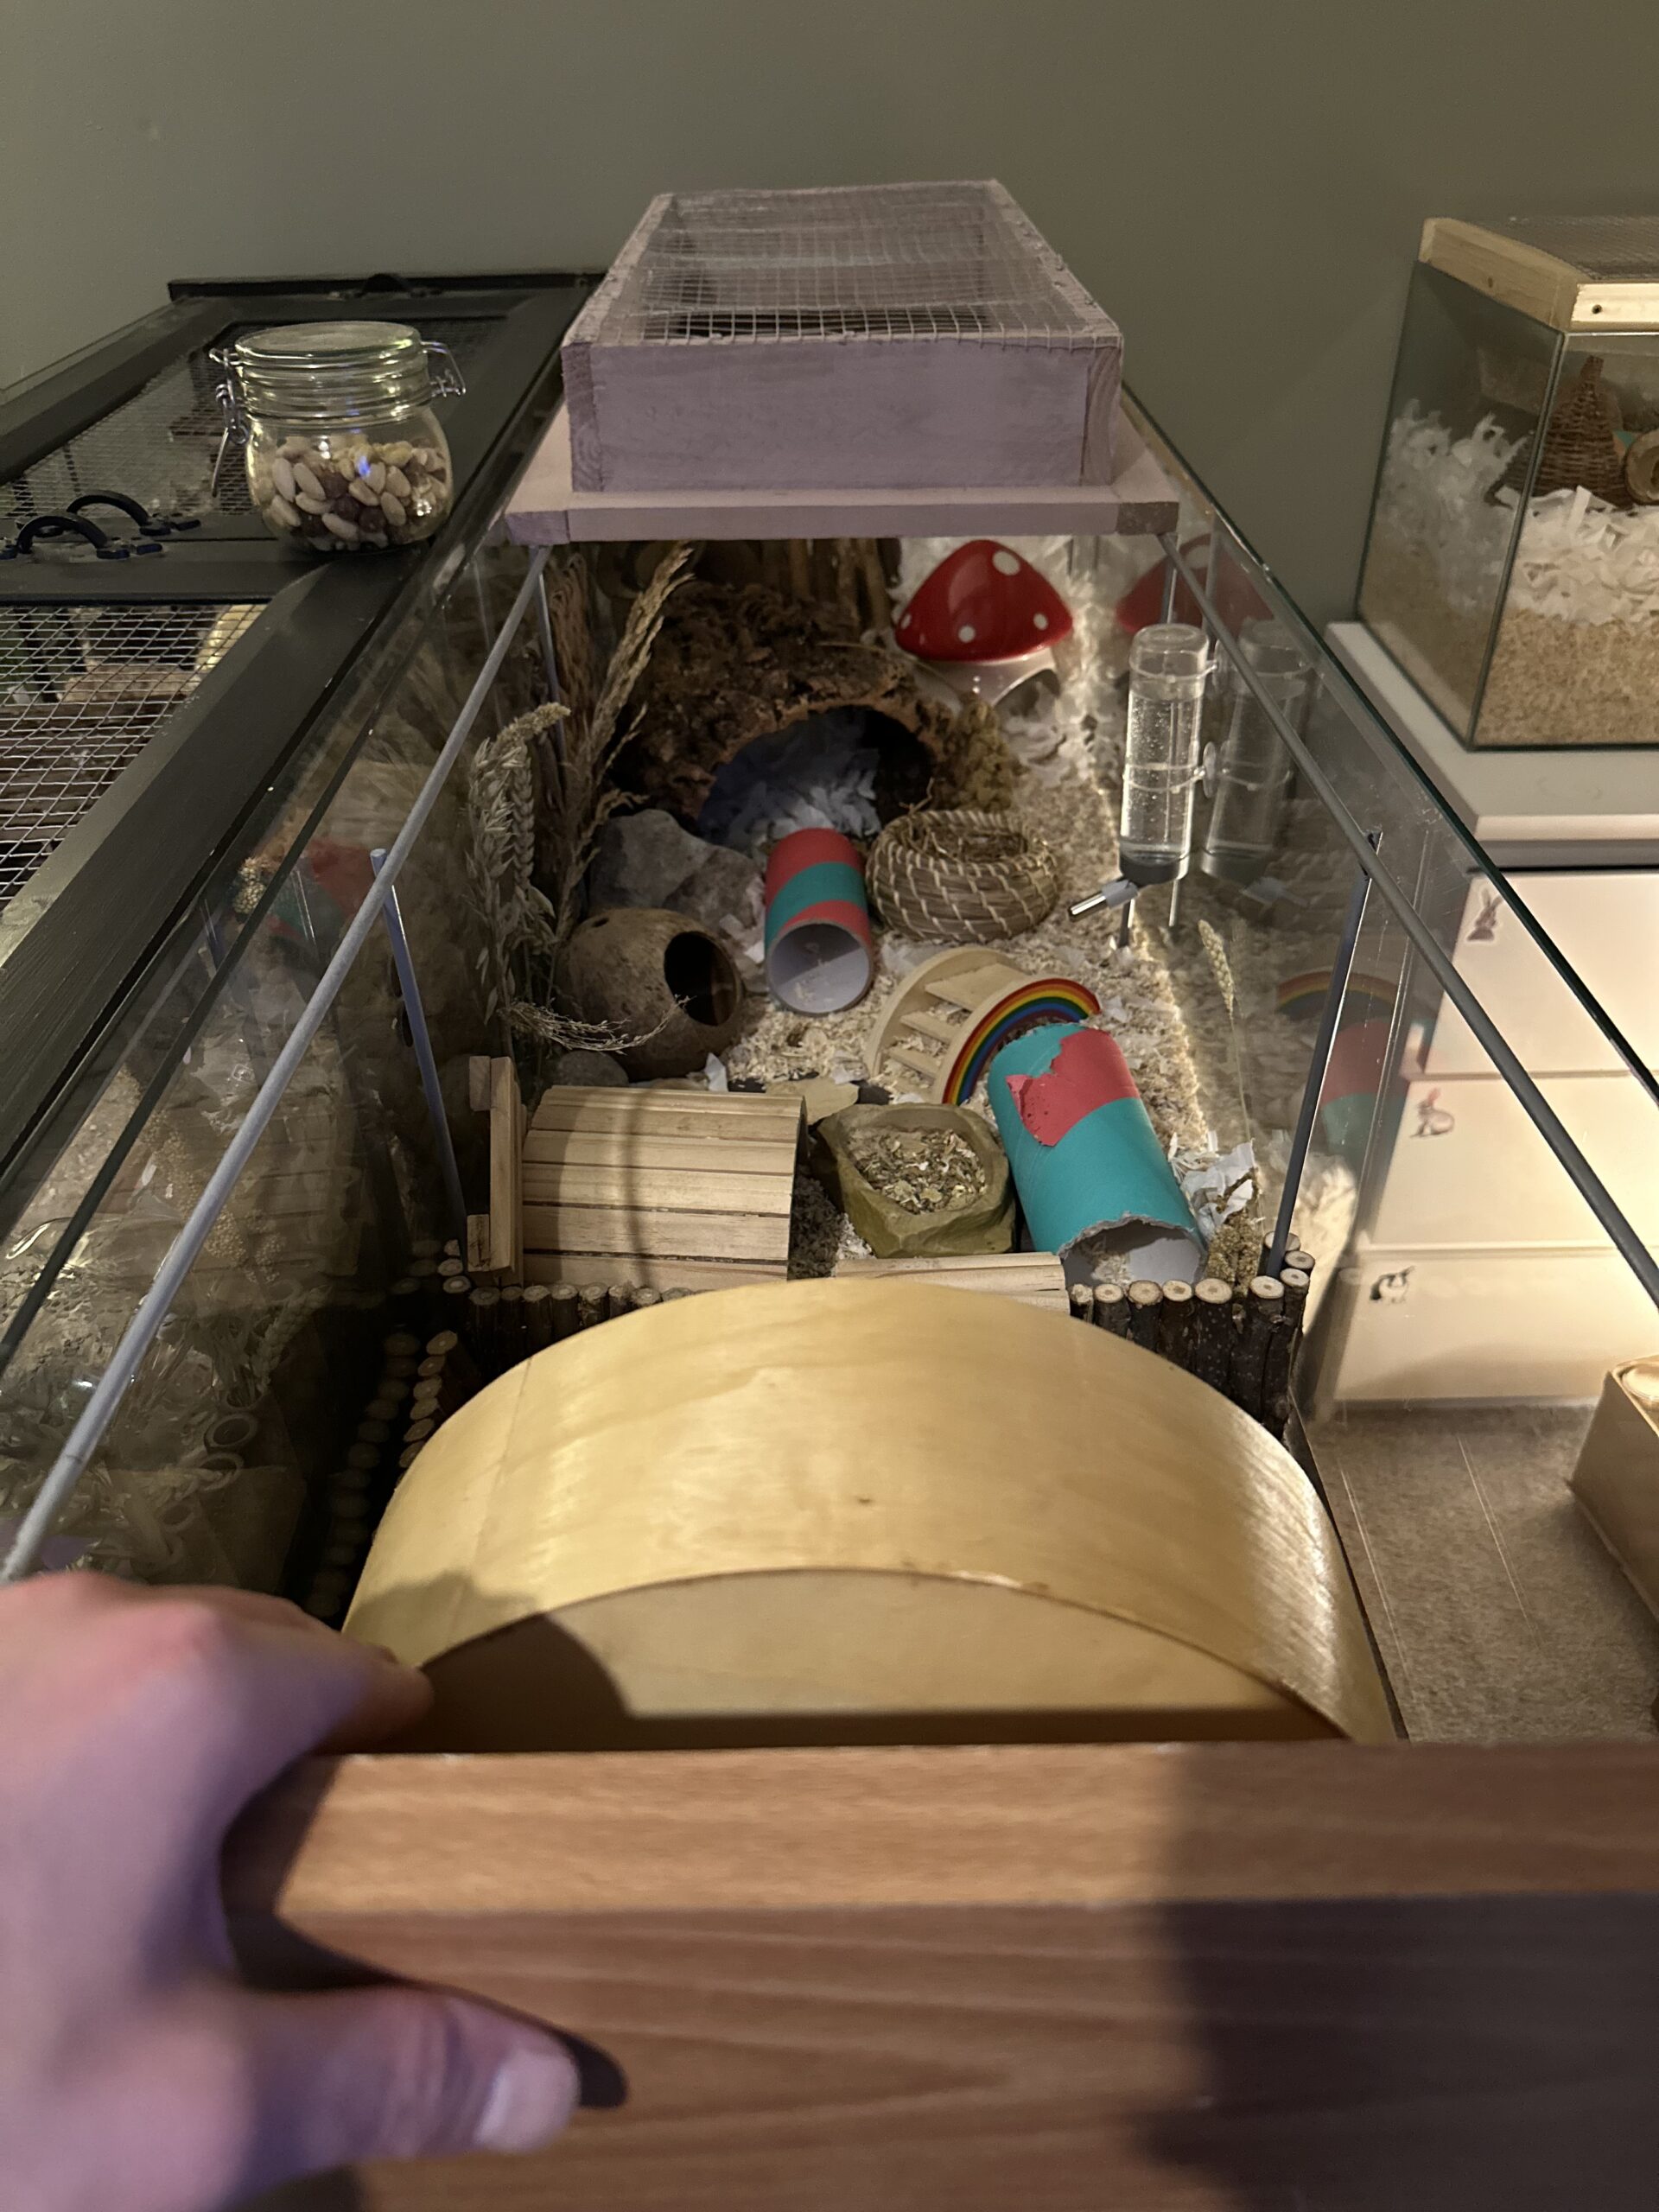 Inside view of Animal rescue enclosure for a hamster